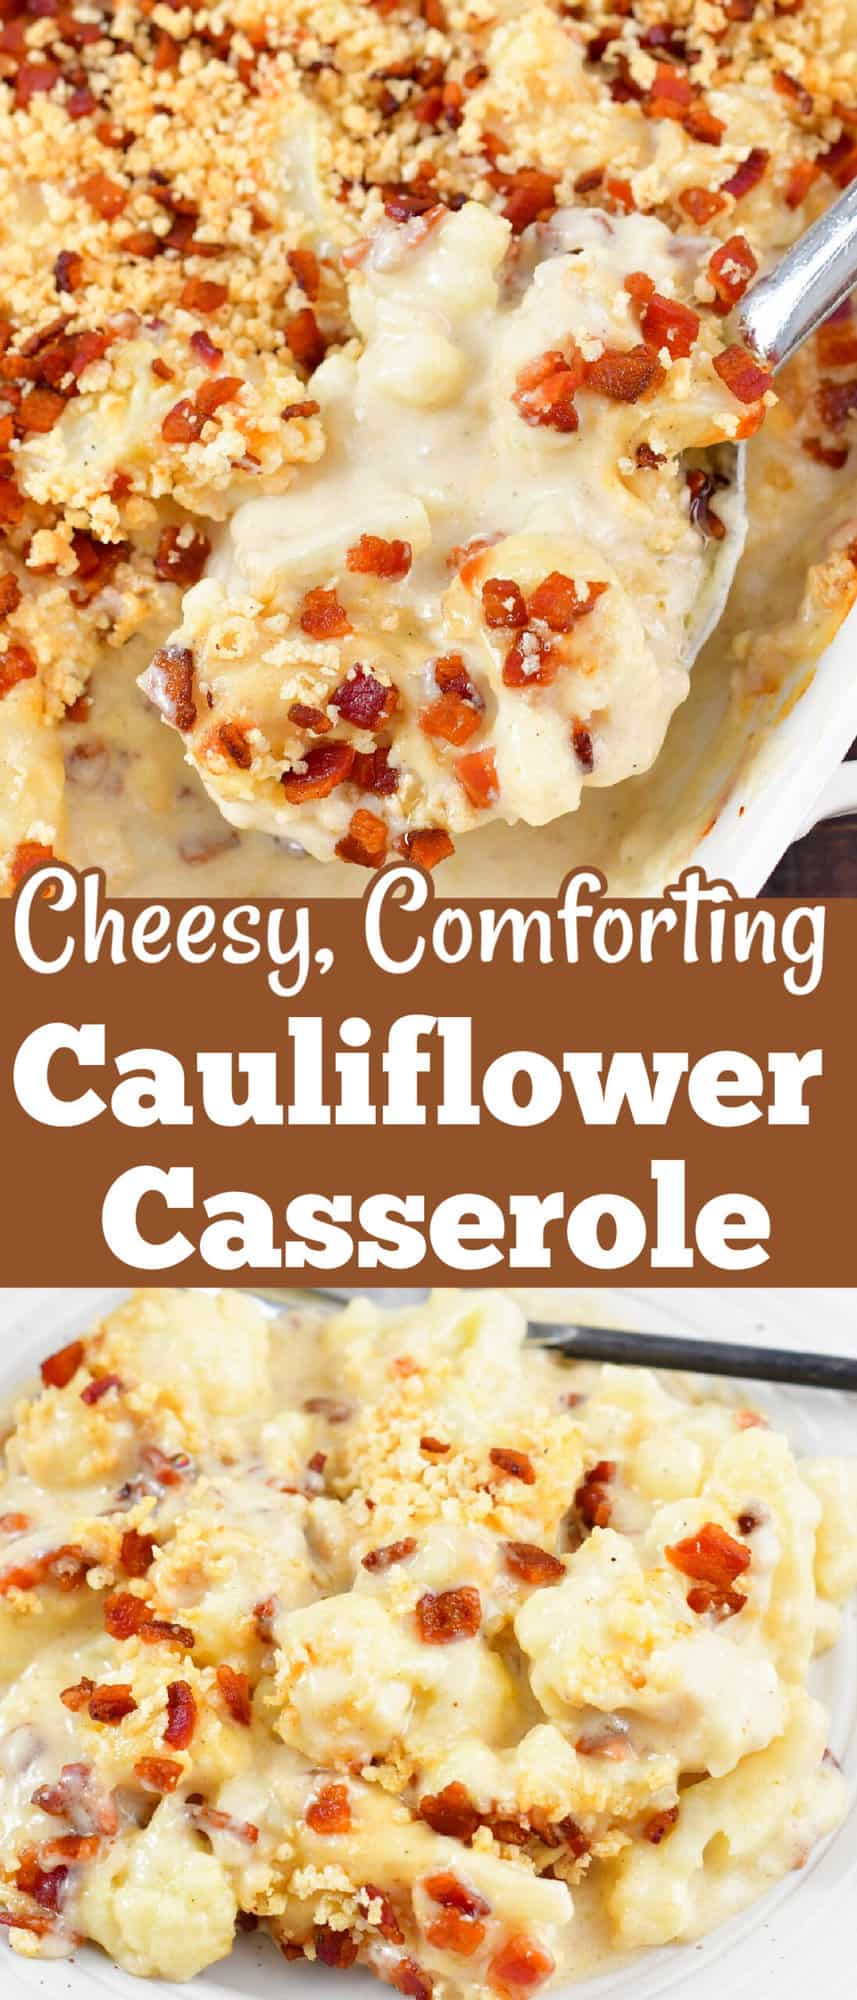 collage of two images of cheesy cauliflower casserole in a baking dish.